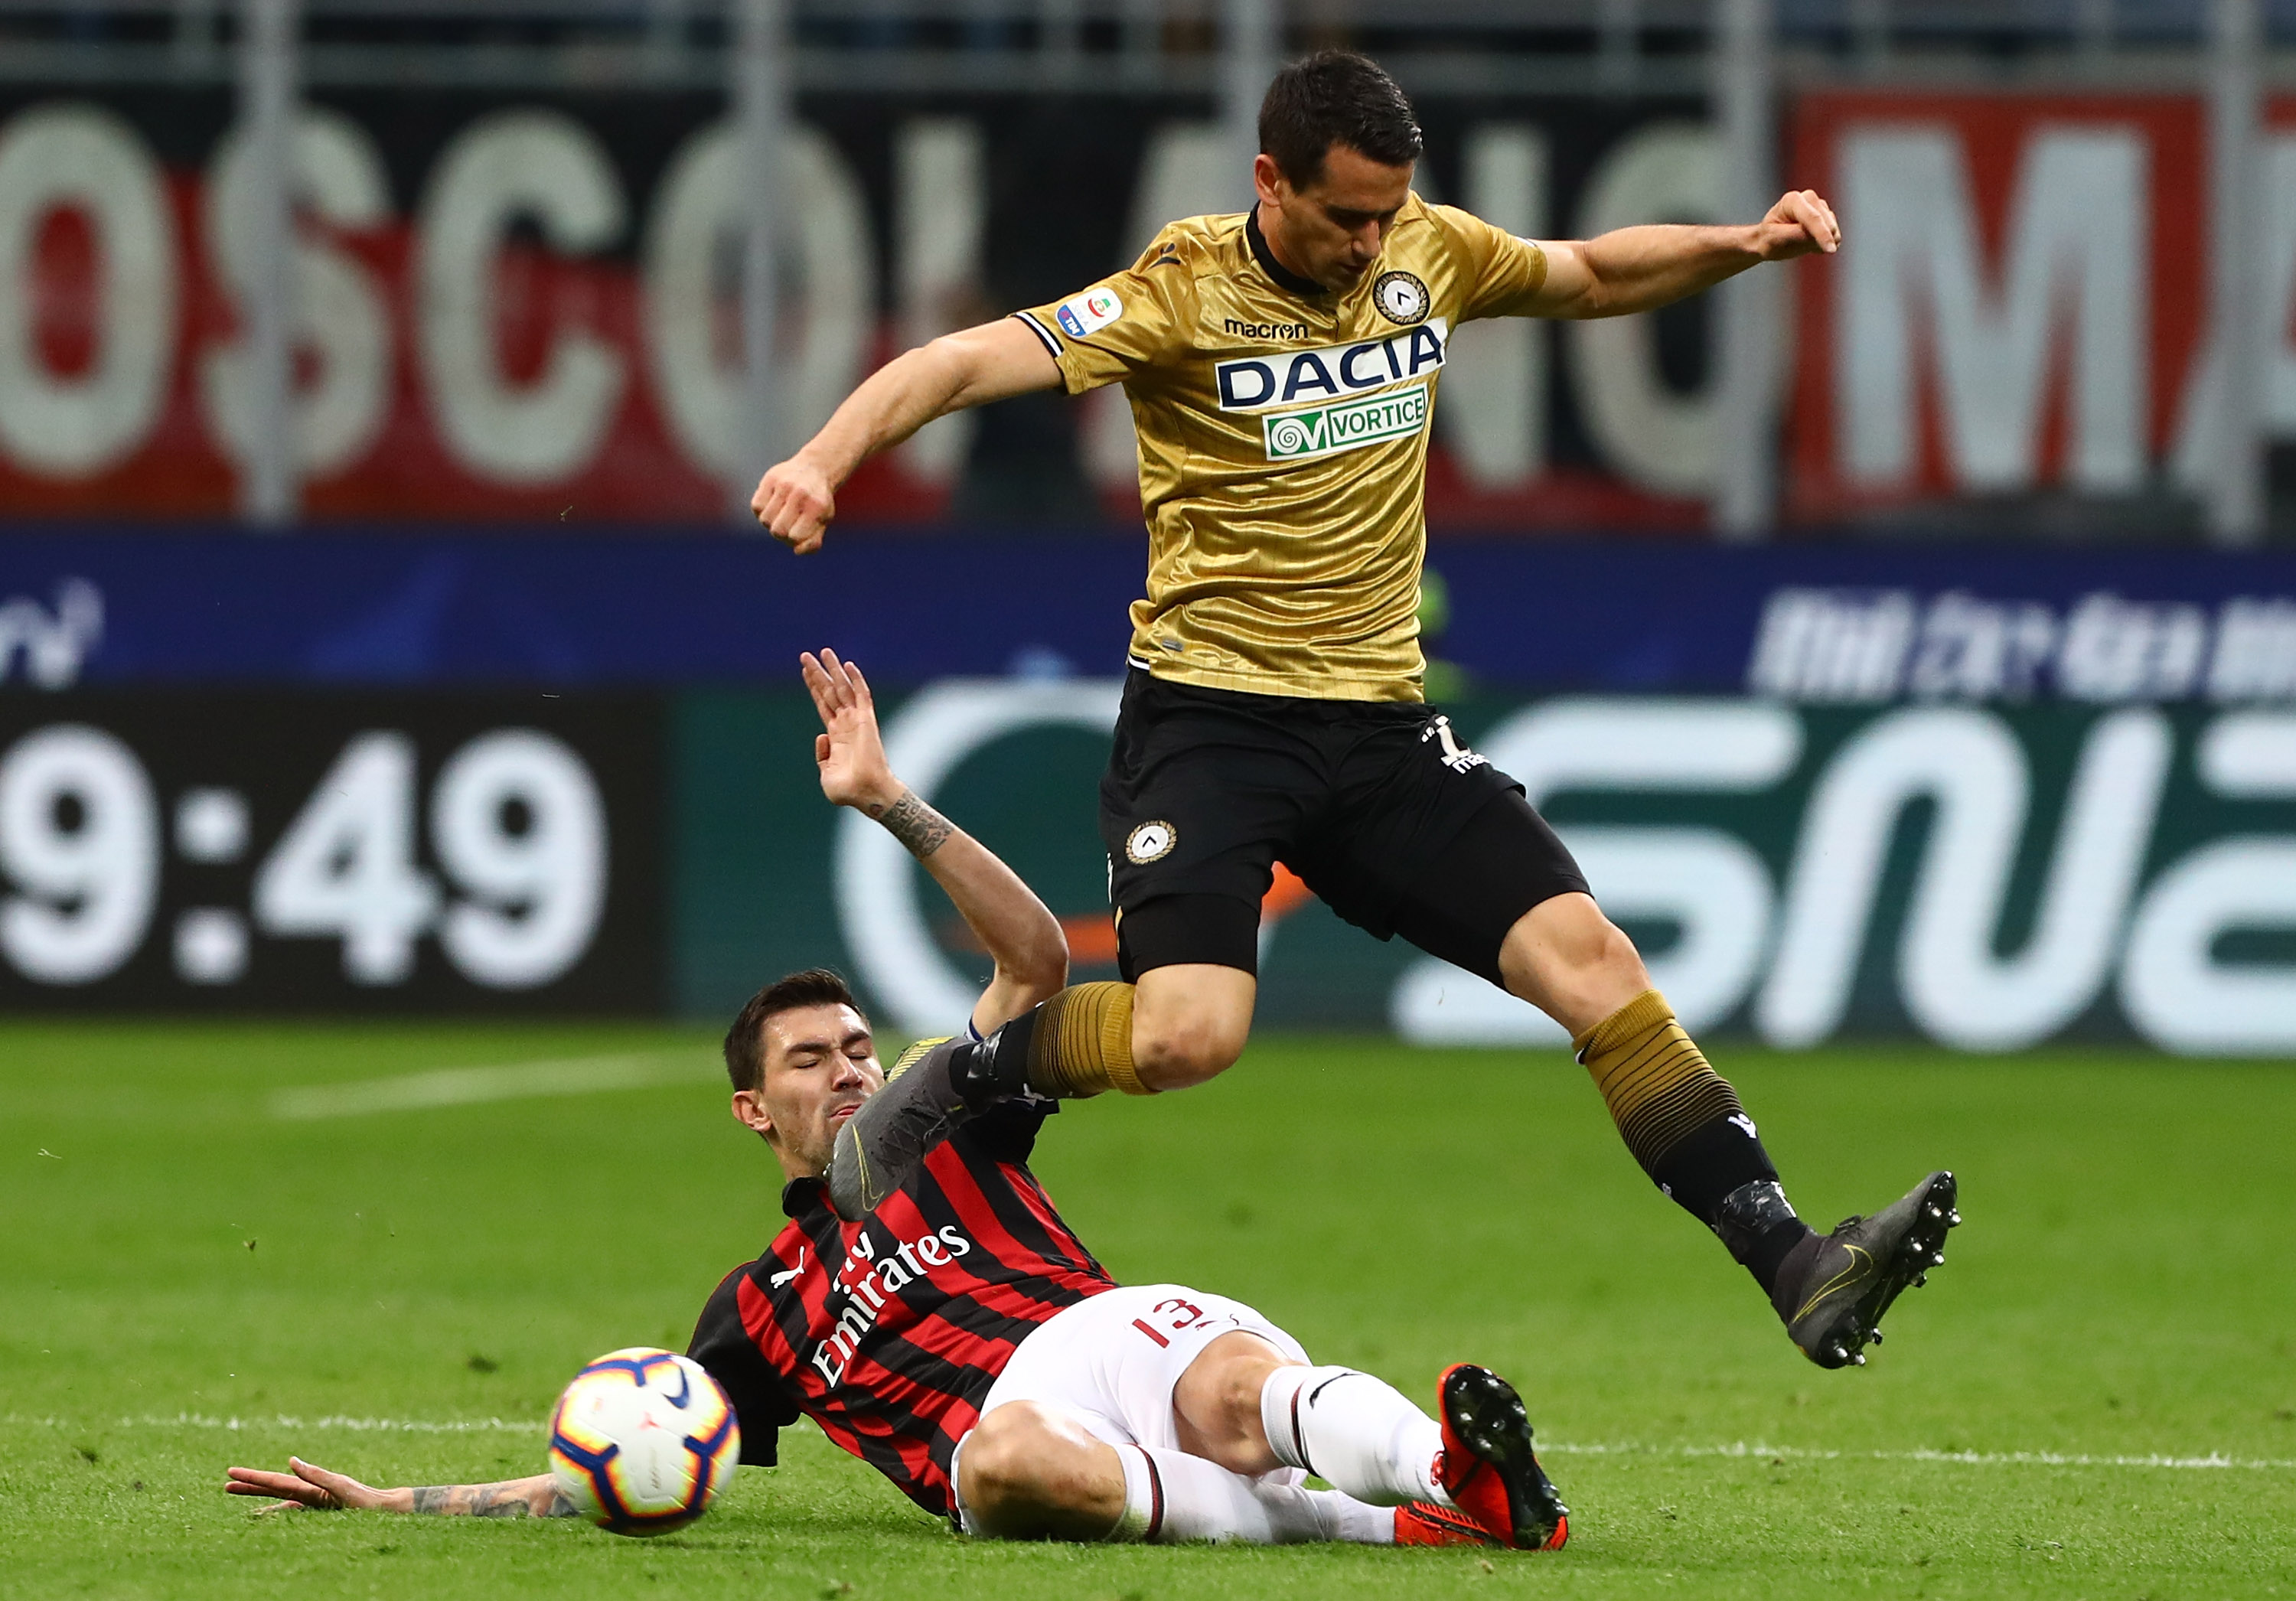 MILAN, ITALY - APRIL 02: Kevin Lasagna of Udinese competes for the ball with Alessio Romagnoli (down) of AC Milan during the Serie A match between AC Milan and Udinese at Stadio Giuseppe Meazza on April 2, 2019 in Milan, Italy. (Photo by Marco Luzzani/Getty Images)